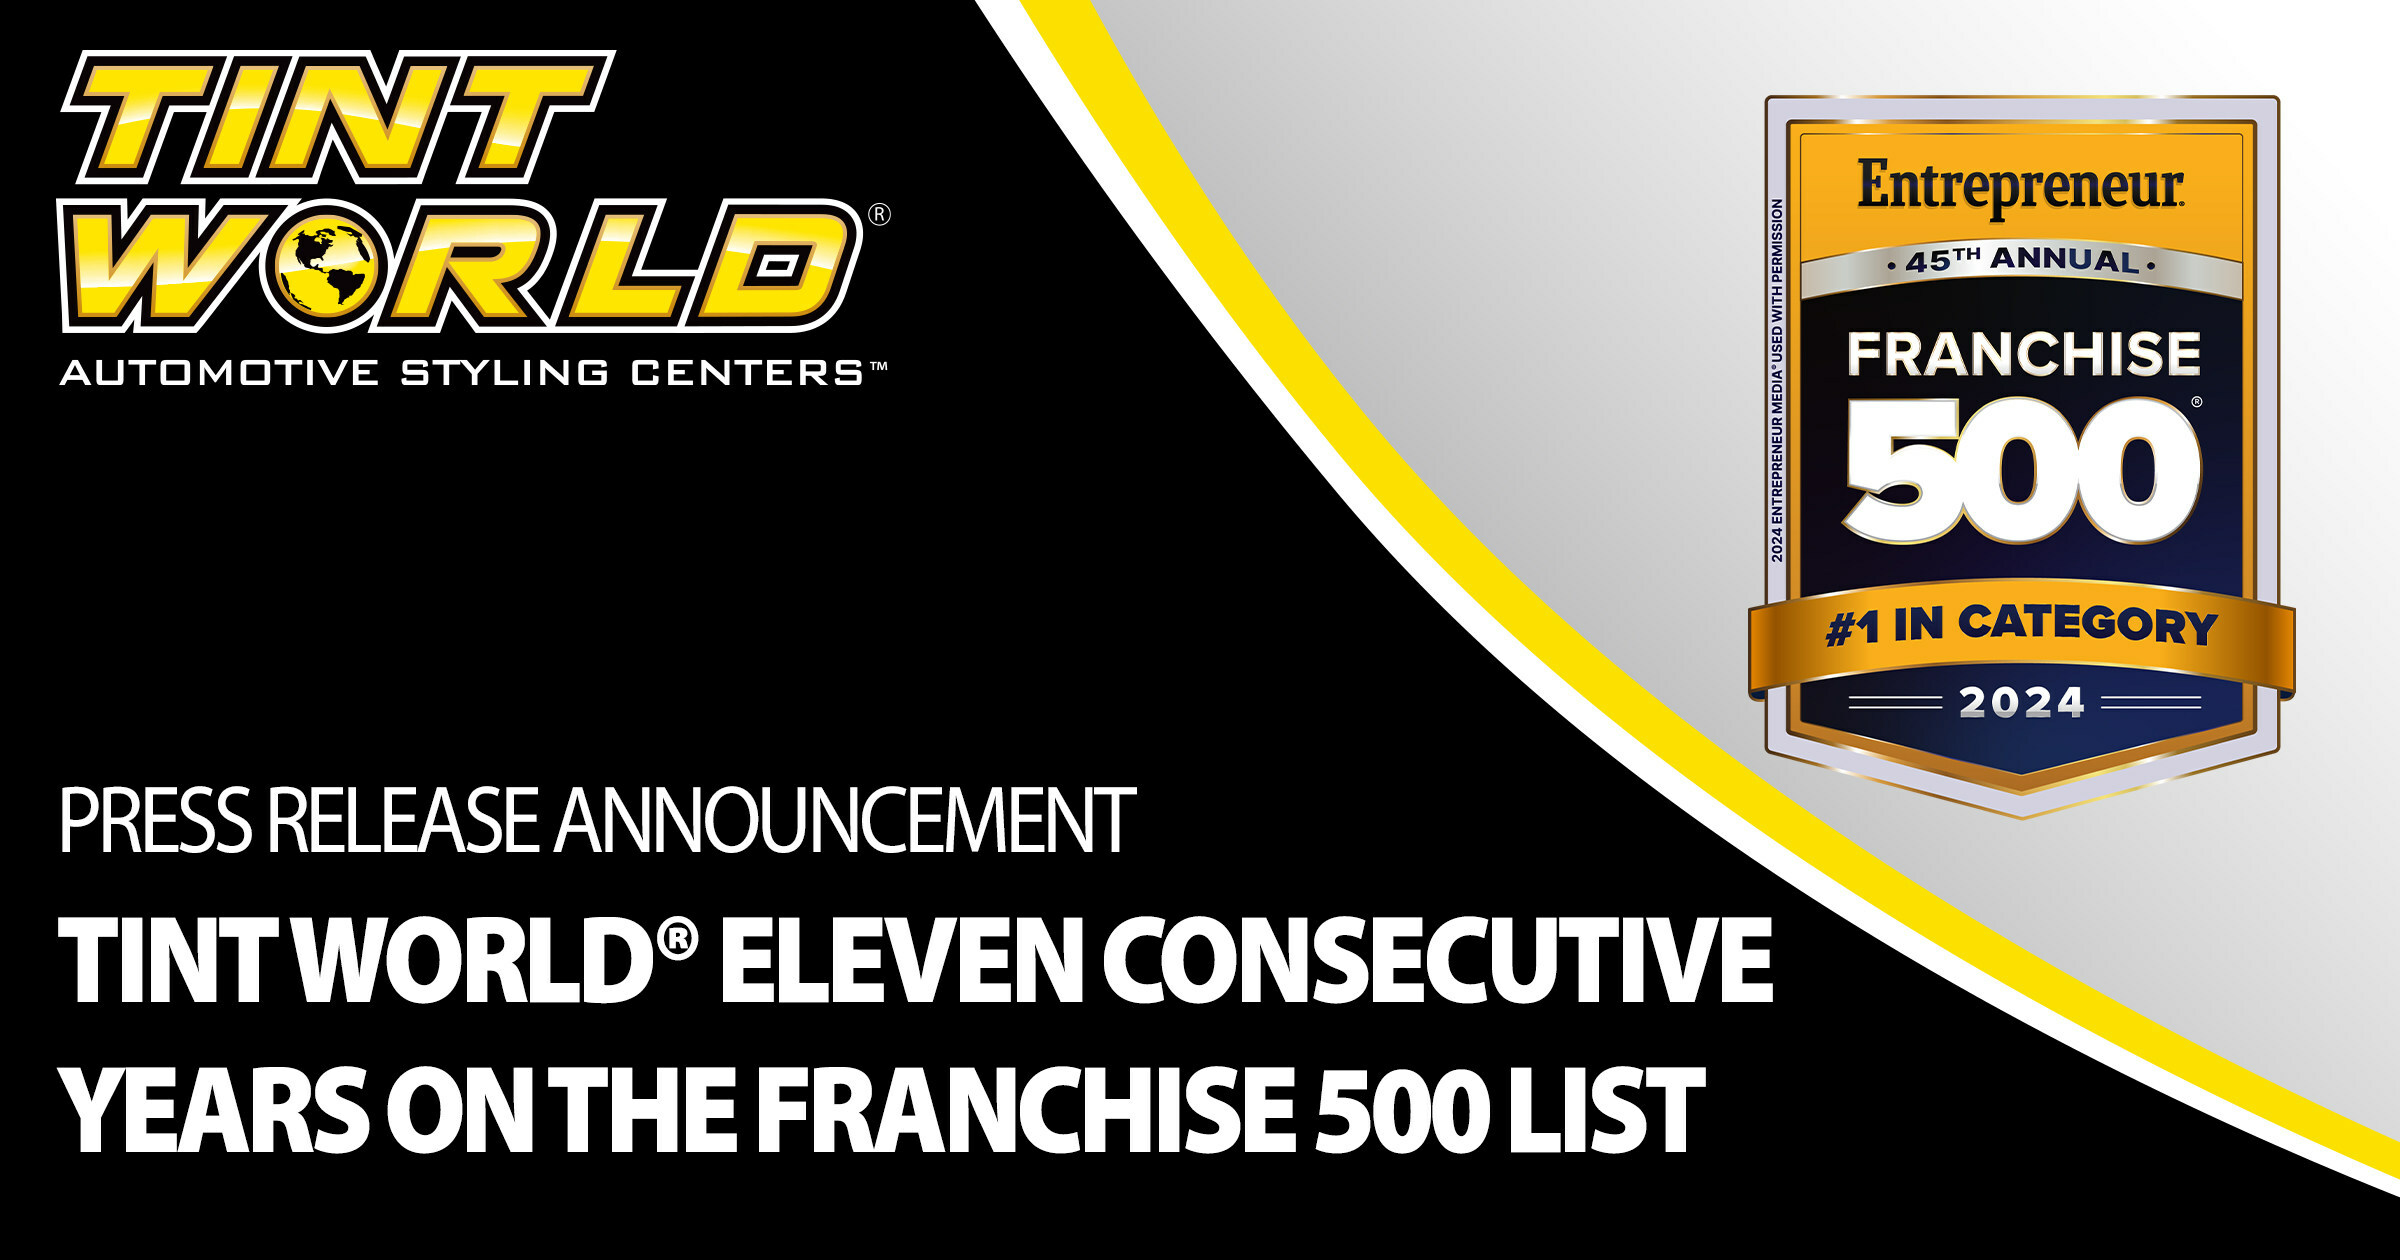 Tint World Ranked a Top Franchise for Entrepreneur’s 45th annual 2024 Franchise 500